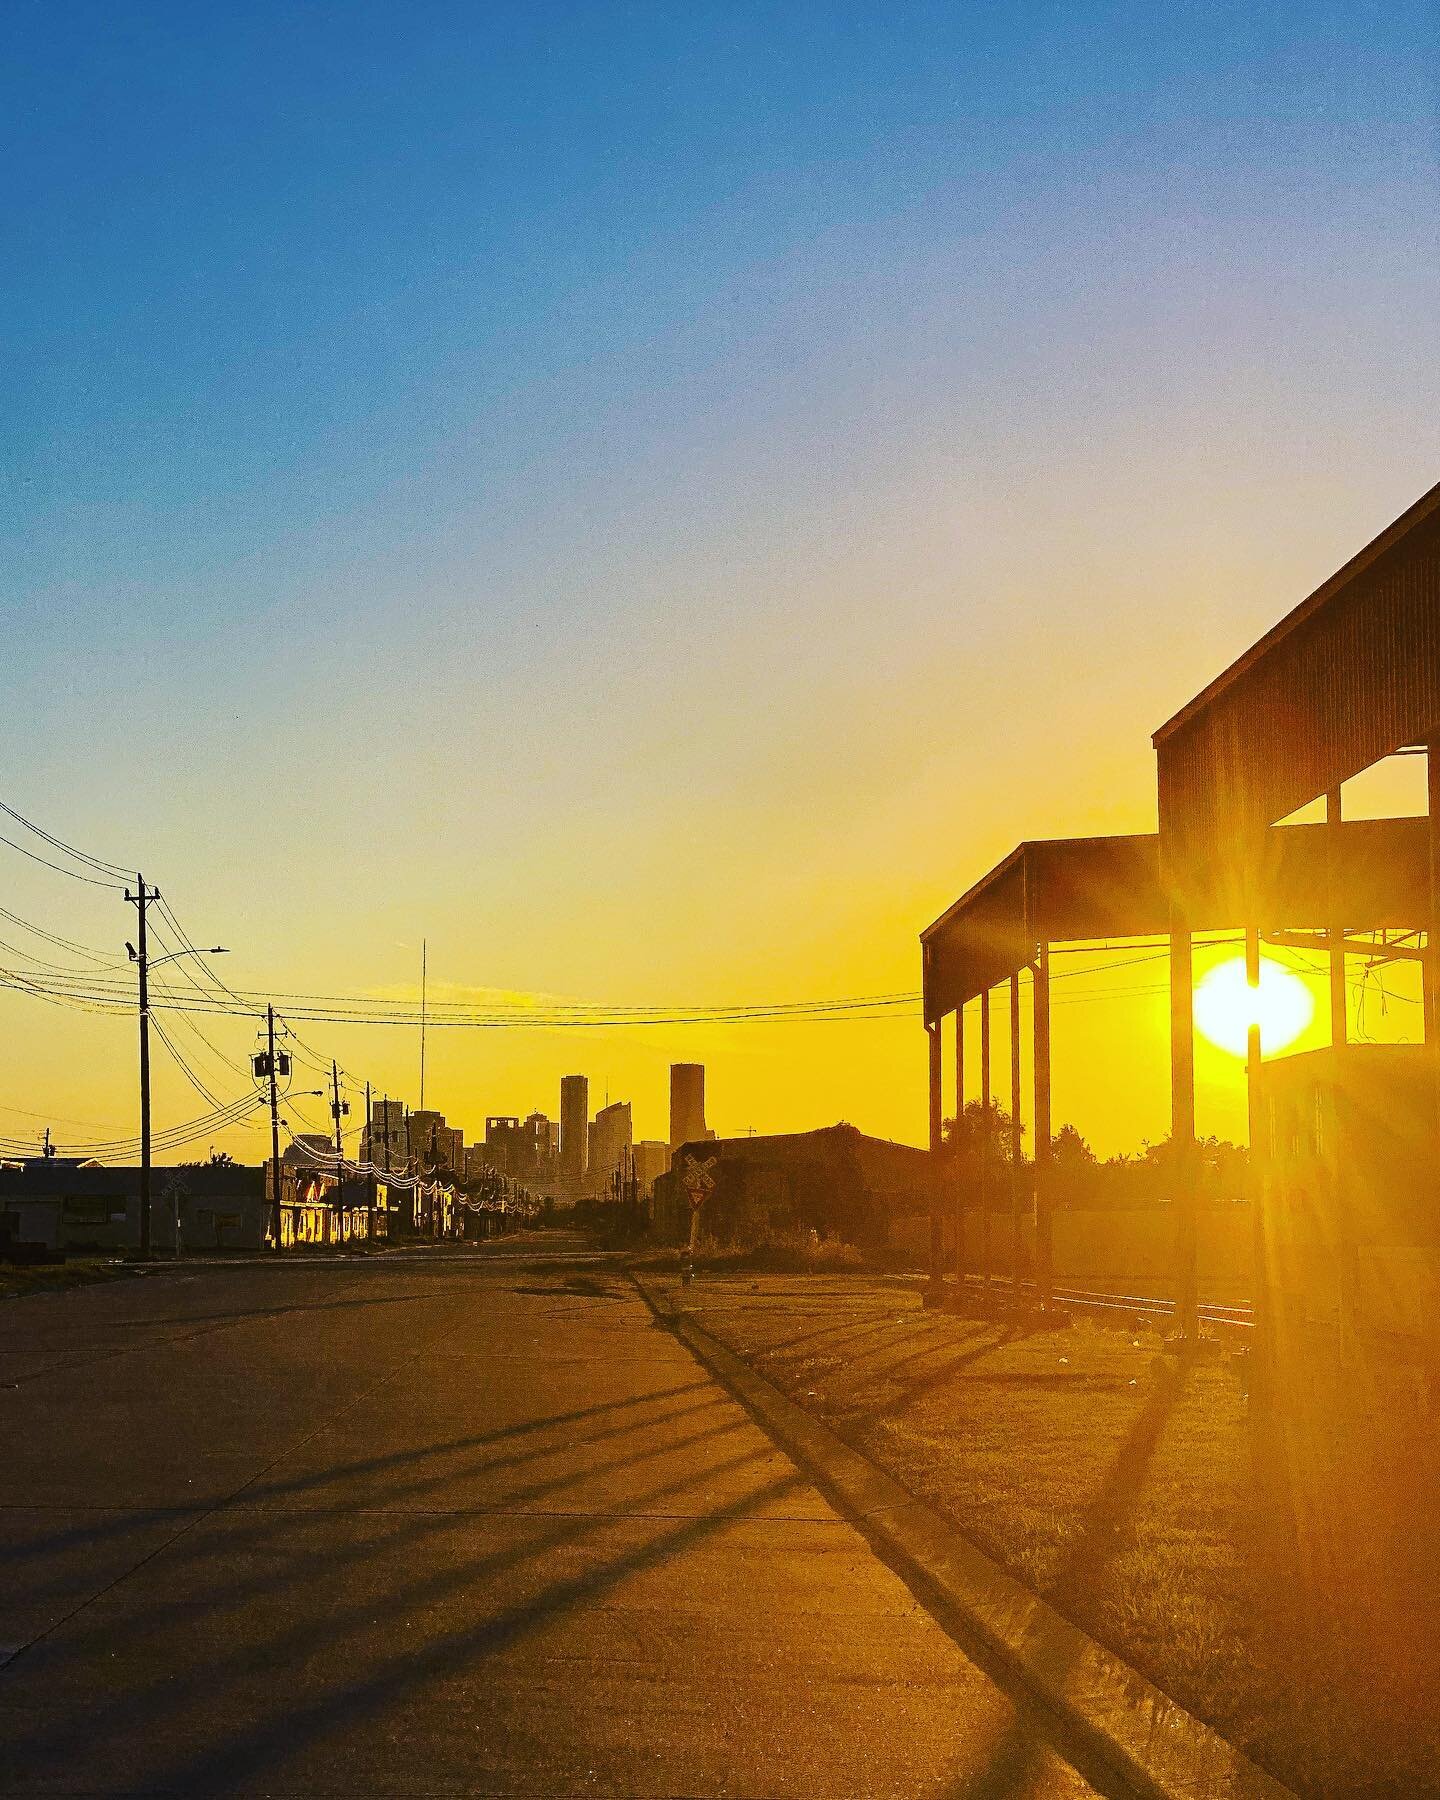 #Houston landscapes vary so drastically depending on the part of town you happen to be in. I have so many spots on the east end of town that I love for viewing sunsets. Tell me a place where you like to go around Houston that you find visually appeal